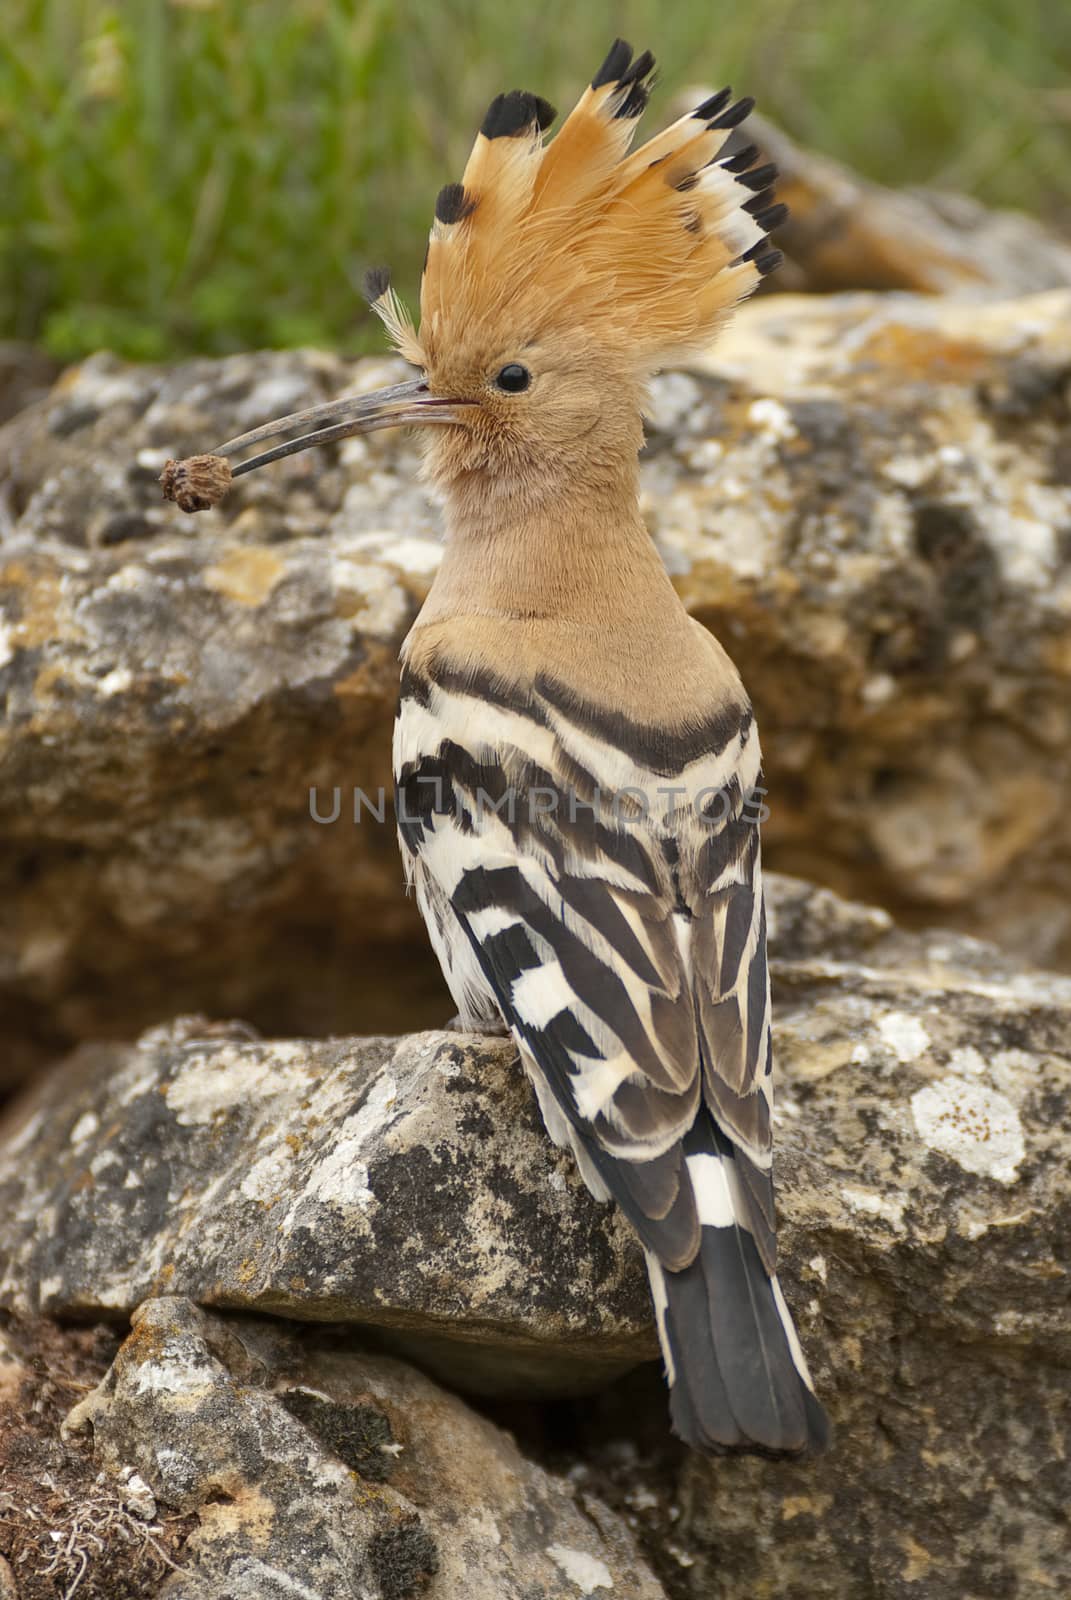 Eurasia Hoopoe or Common Hoopoe (Upupa epops), with a beetle in  by jalonsohu@gmail.com